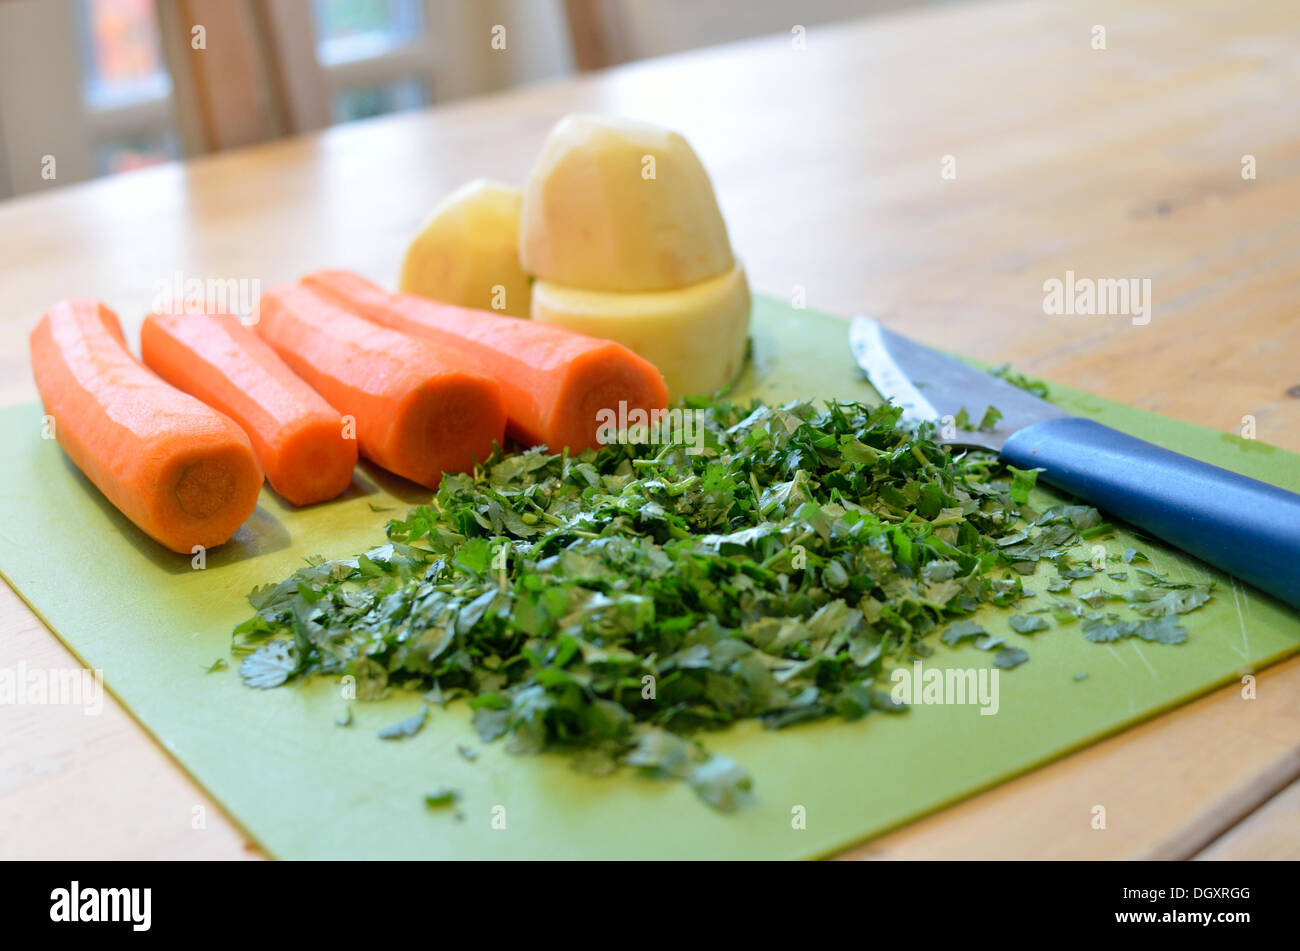 Chopped vegetables and herbs on a chopping board Stock Photo